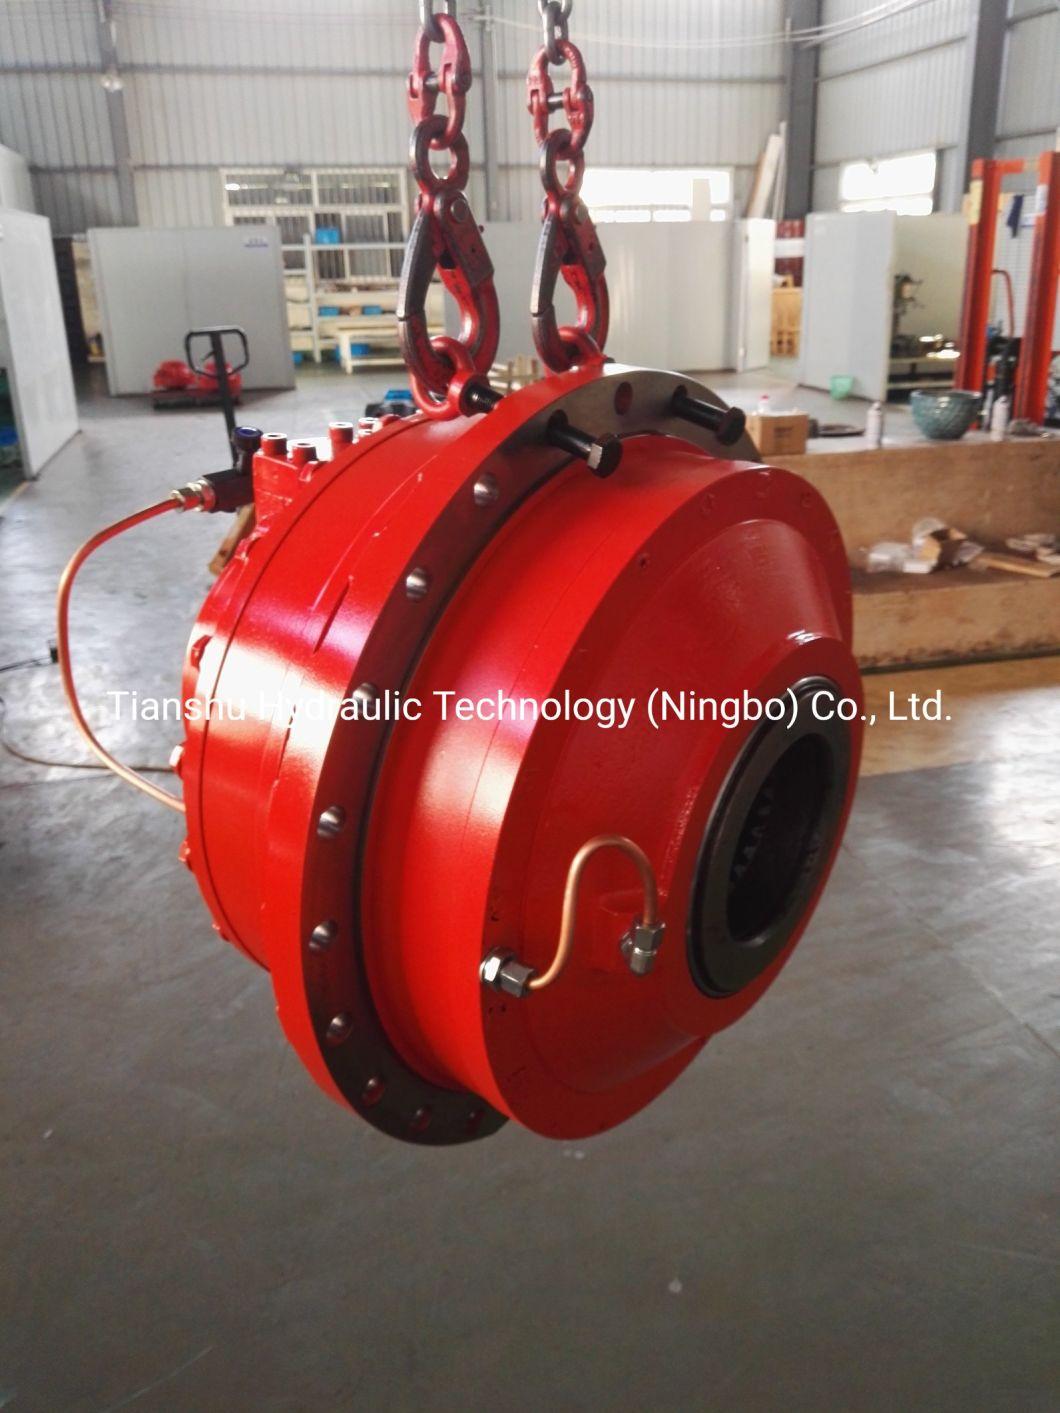 Rexroth Type Ca Series Hagglunds Hydraulic Pump Motor for Marine Winch and Anchor.